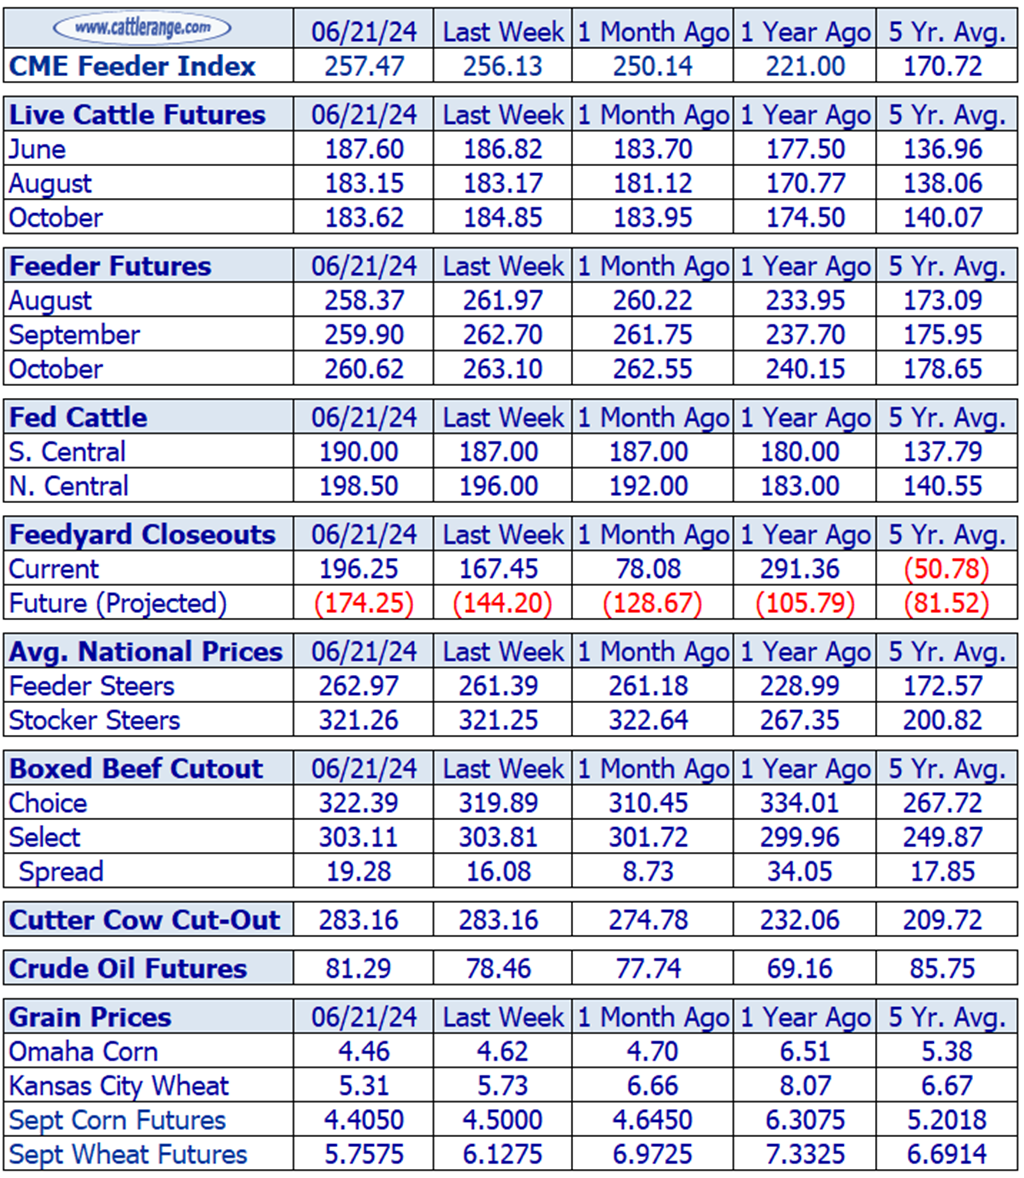 Weekly Cattle Market Overview for Week Ending 6/21/24